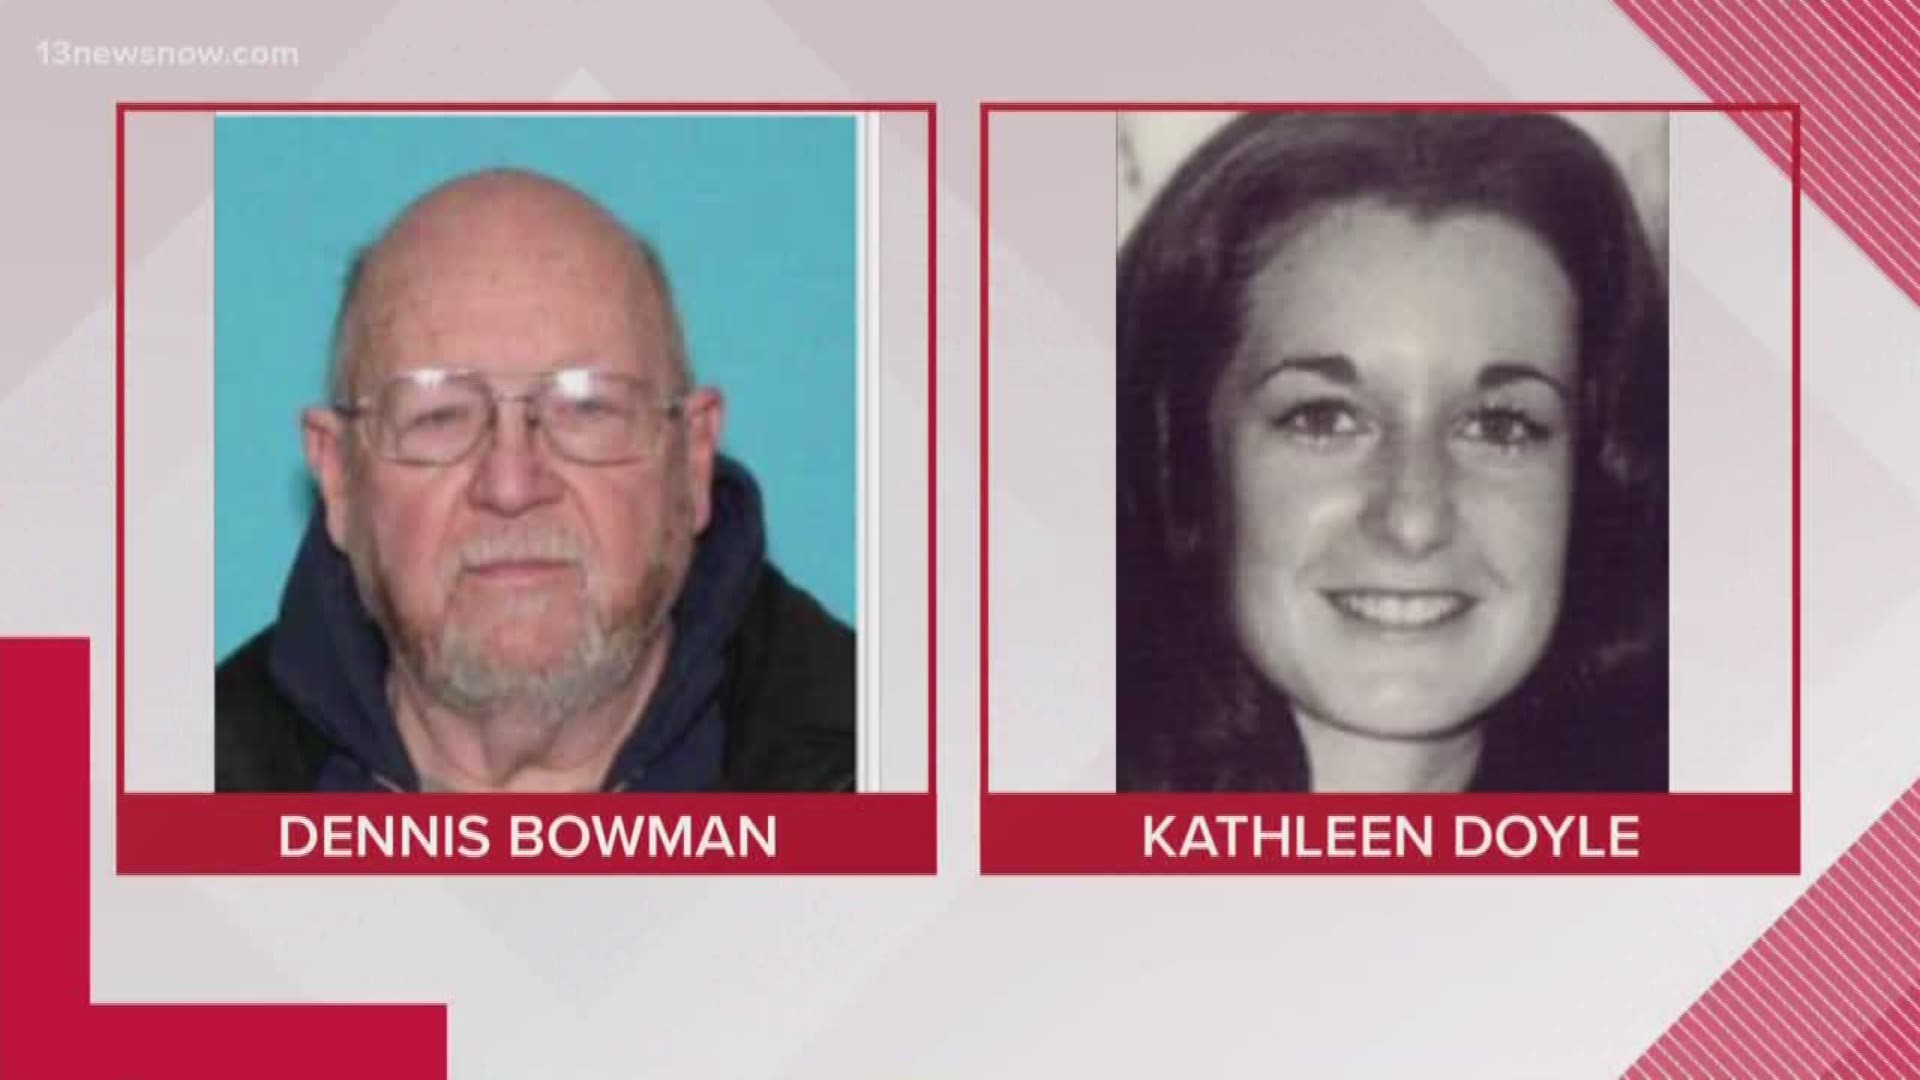 There's an arrest in a 39-year-old cold case in Norfolk. 70-year-old Dennis Lee Bowman is charged with killing 25-year-old Kathleen Doyle back in 1980.